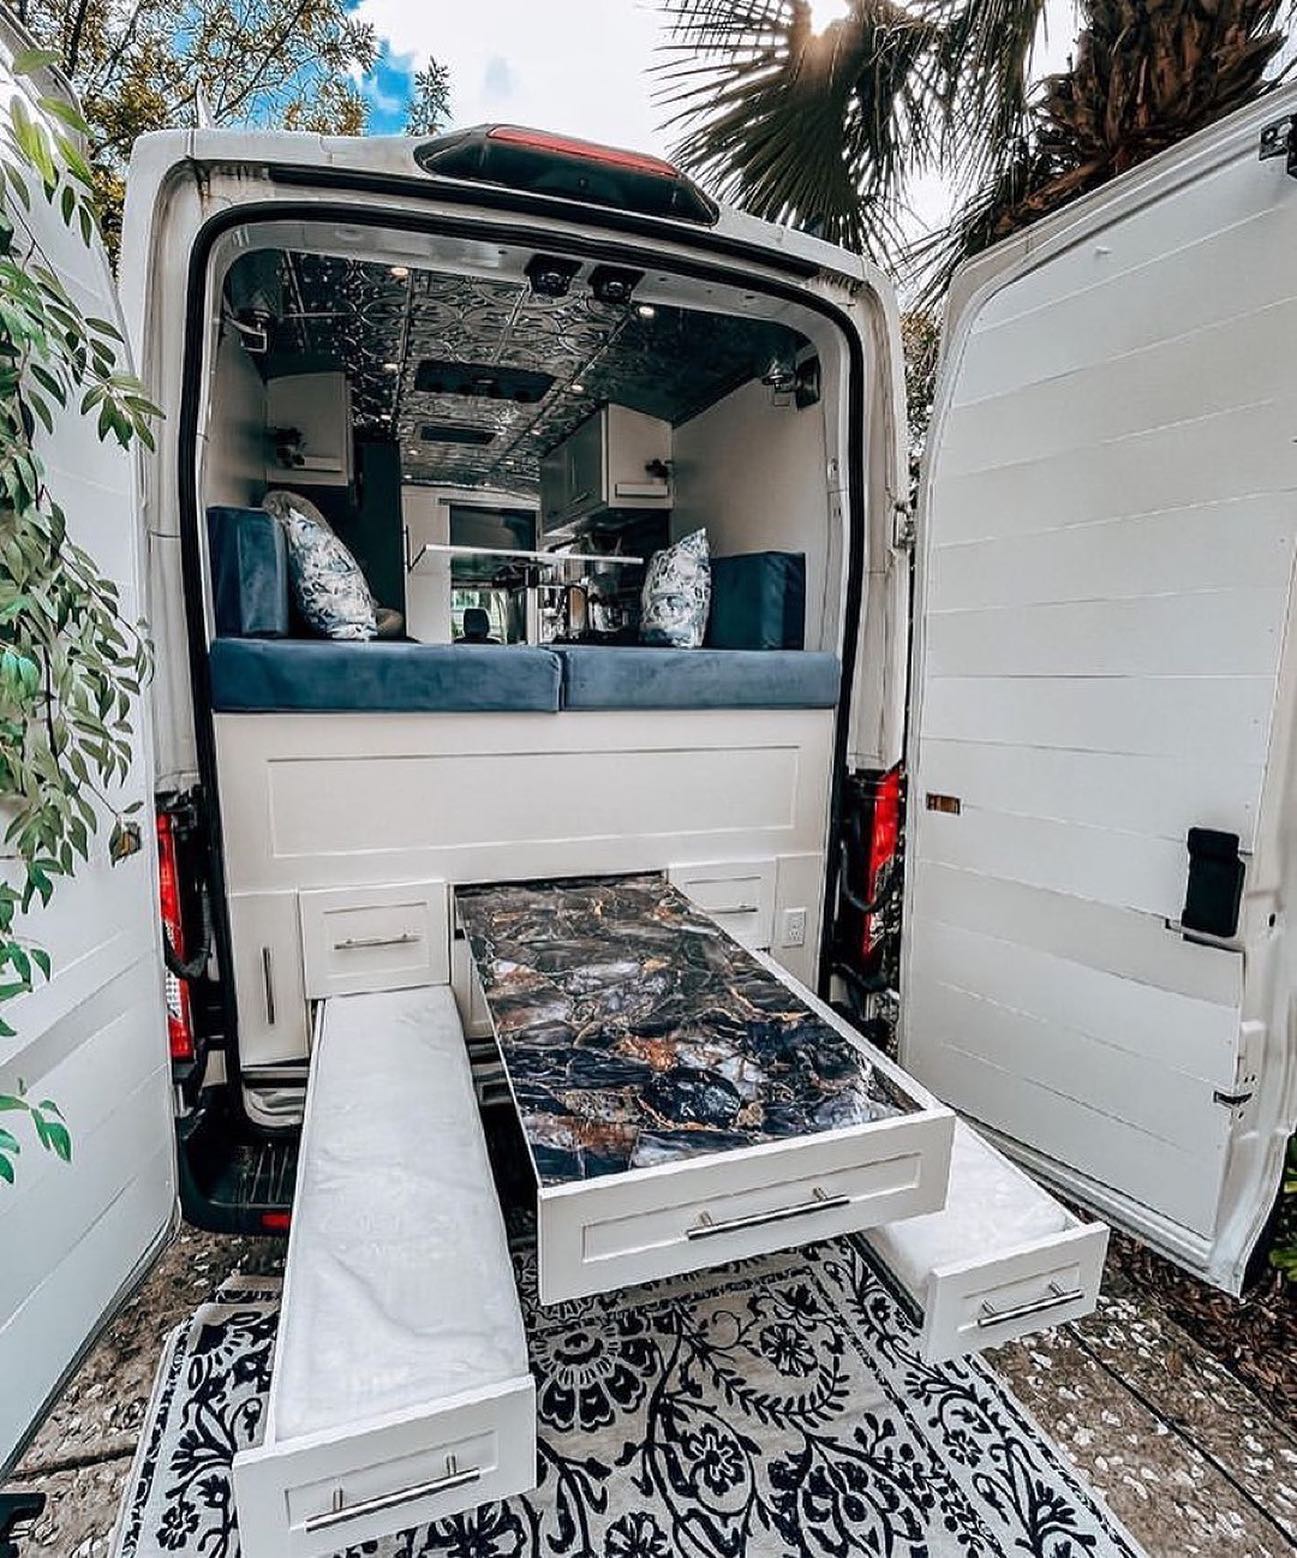 We are obsessed with this garage layout by @stella.the.van ! Go check out their page!   Comment below your favorite features 🤩⁠  Tag someone that would love this. Save for future inspiration 😍  Visit our website for essential and exclusive vanlife products including electric, insulation, flooring, cooking, and more! Link in bio 📲  Follow @vanlifeoutfitters for daily tips, inspiration, and all things Vanlife. 🚐  To get features, use #Vanlifeoutfitters or tag us @vanlifeoutfitters 📲 * * * * * * * * *  #homeiswhereyouparkit #ontheroad #vanlifers #roamingaround #vanlifeeurope #vanconversion #busconversion #campervanconversion #vanbuild #travelinspo #vanlifebuild #diycamper #vanlifehack #diybusconversion #skoolieconversion #sprinterconversion #campervanbuild #vandweller #roamtheplanet #homeonwheels #vanlife#vanlifemovement #vanlifedream #vanlifeadventure #vanlifehub #projectvanlife #vanlifeproject